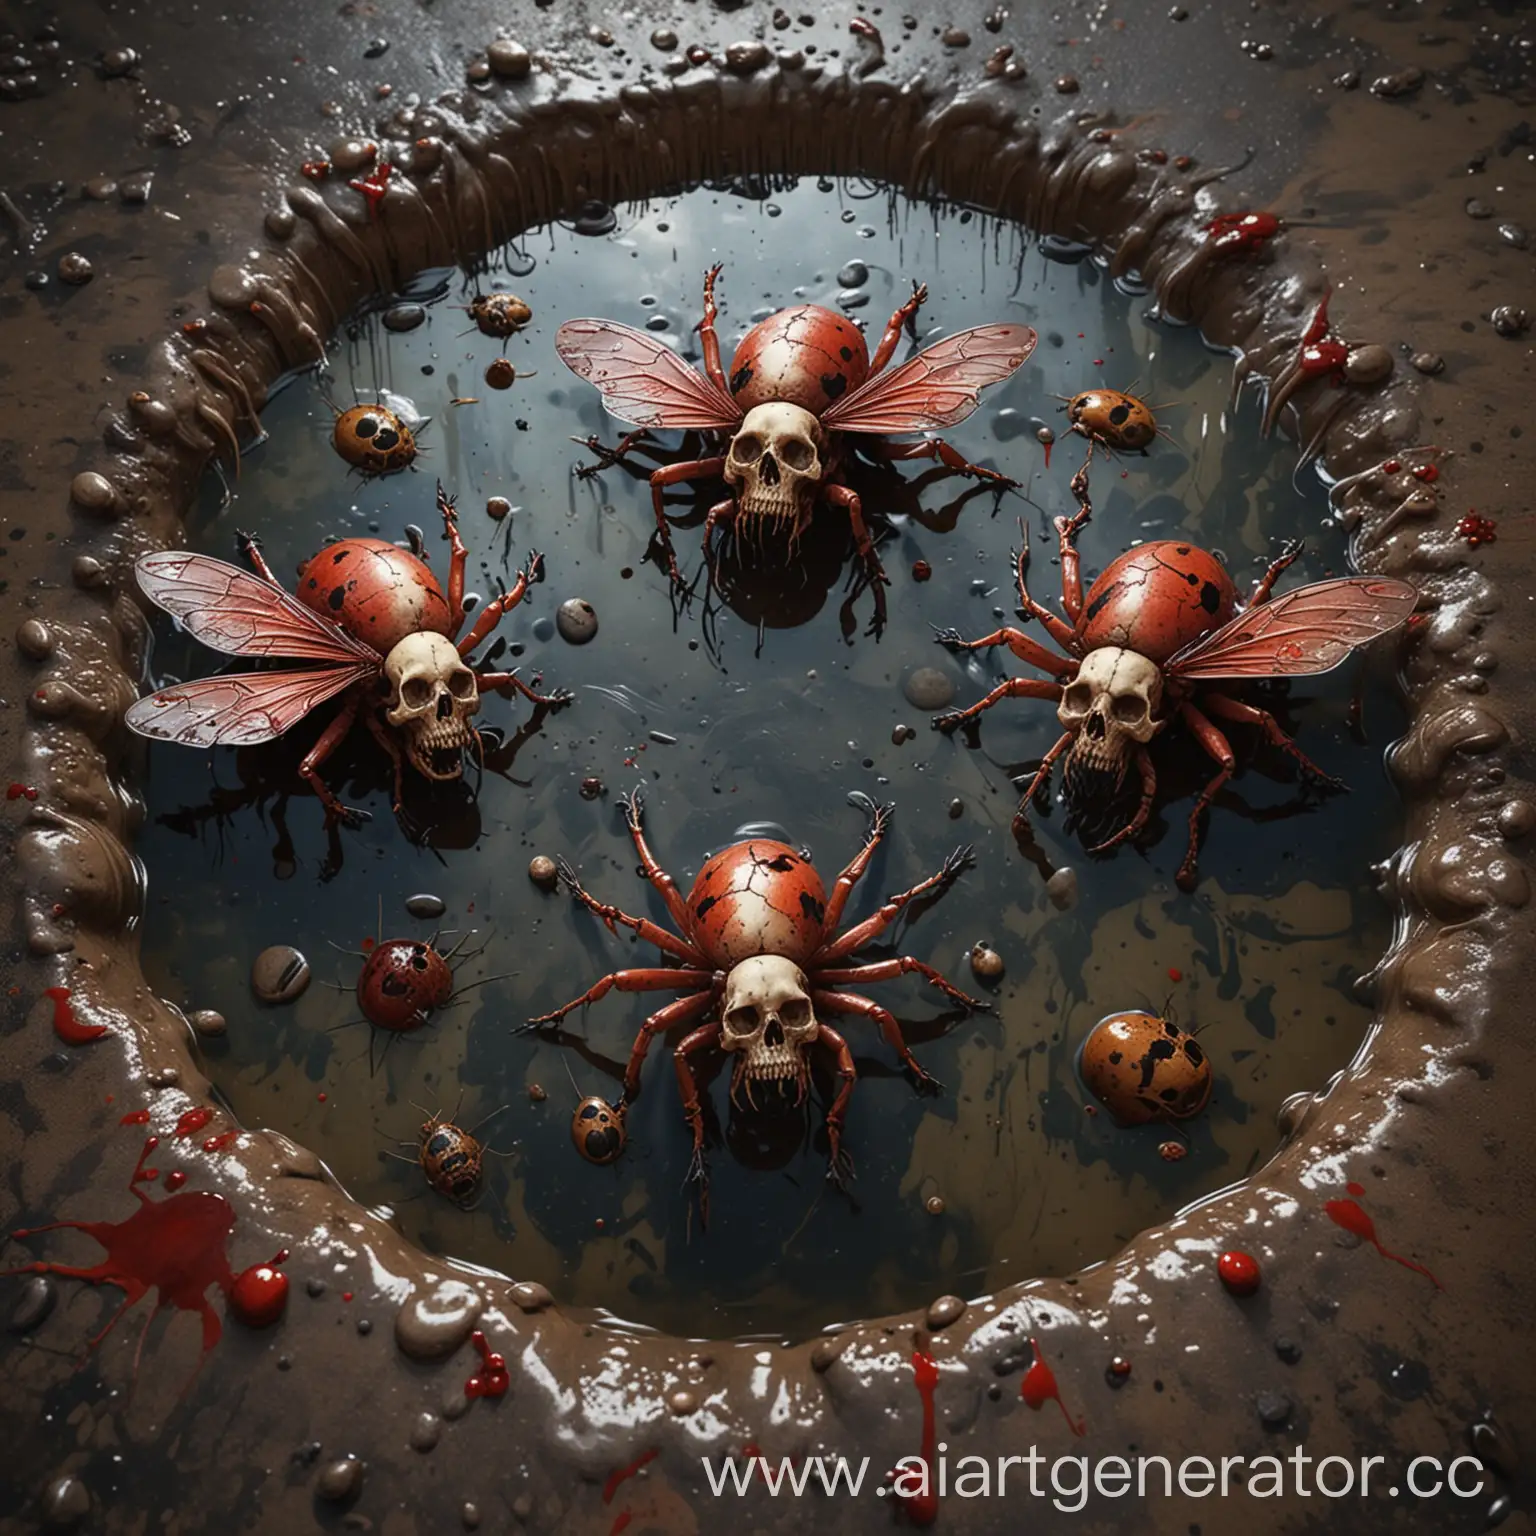 Hyperrealistic-Insects-with-Skull-Patterns-in-Murky-Slime-and-Blood